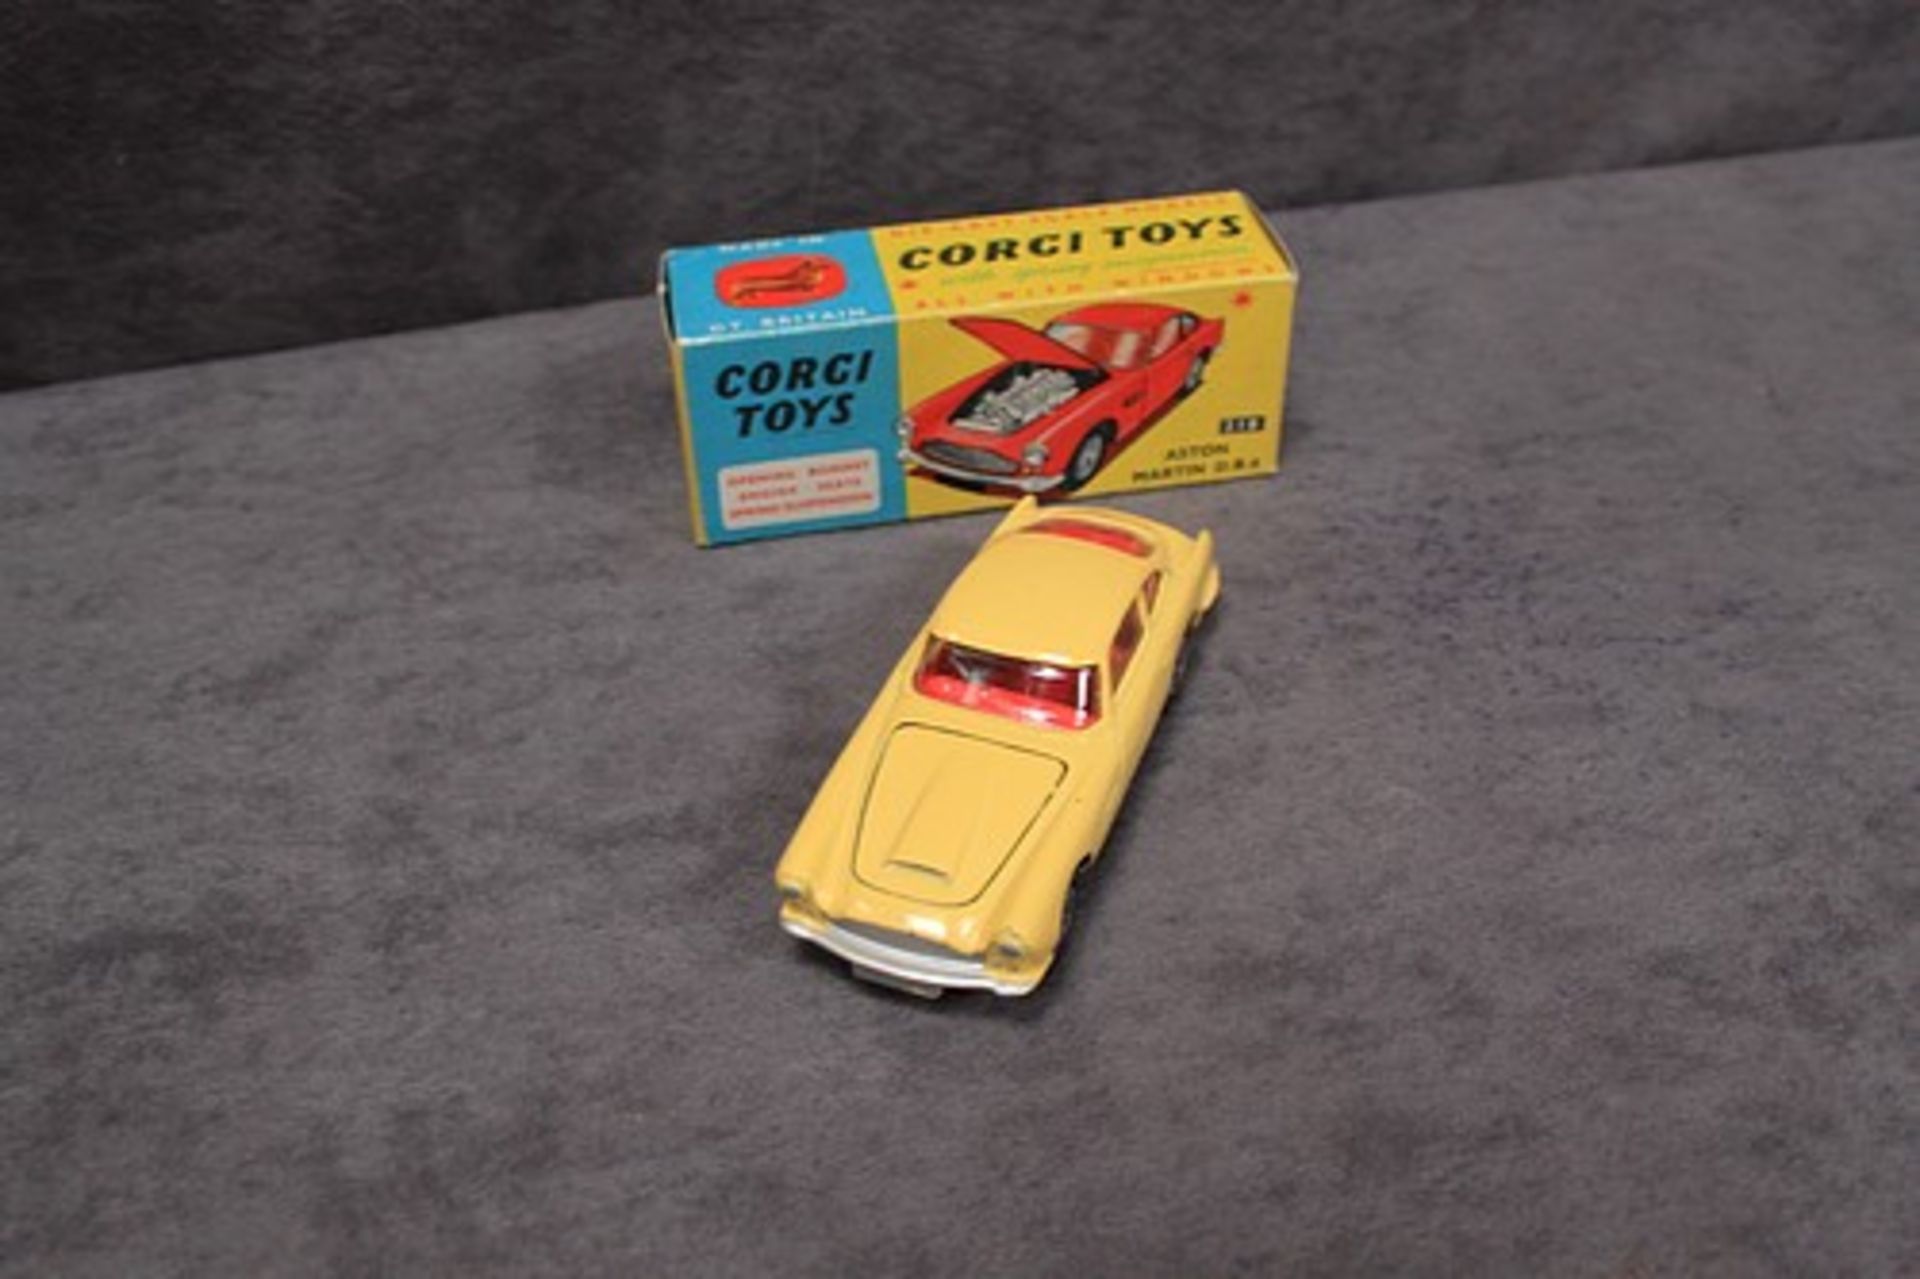 Mint Corgi Toys Diecast #218 Aston Martin DB4 in yellow in a excellent box